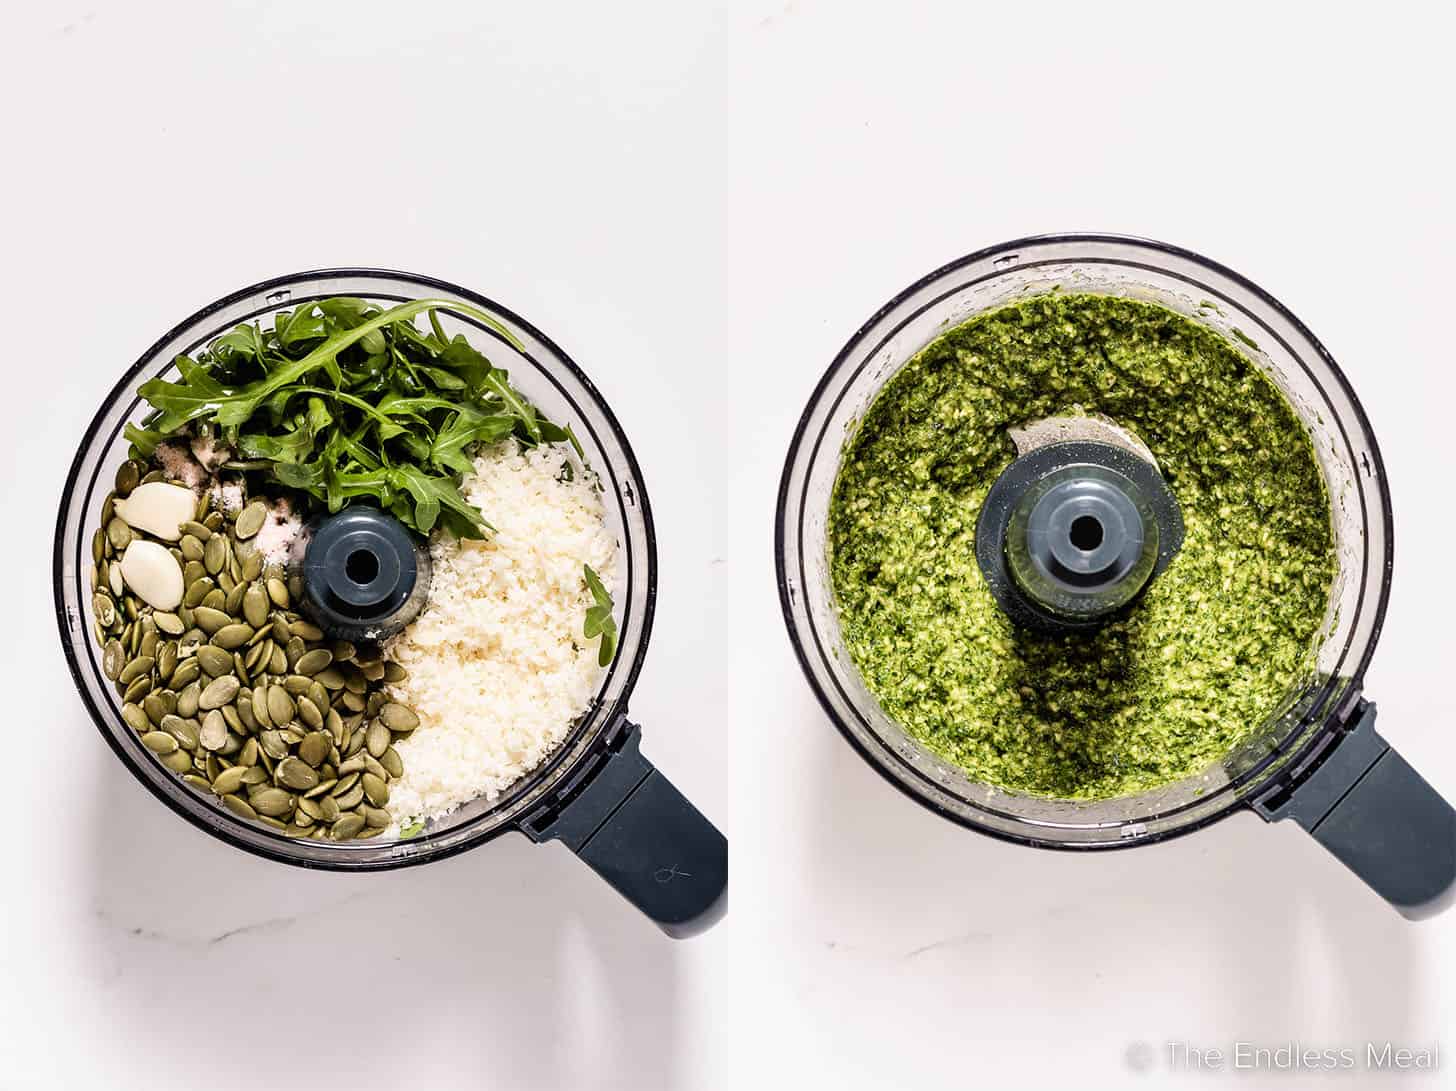 Two pictures showing how to make Arugula Pesto